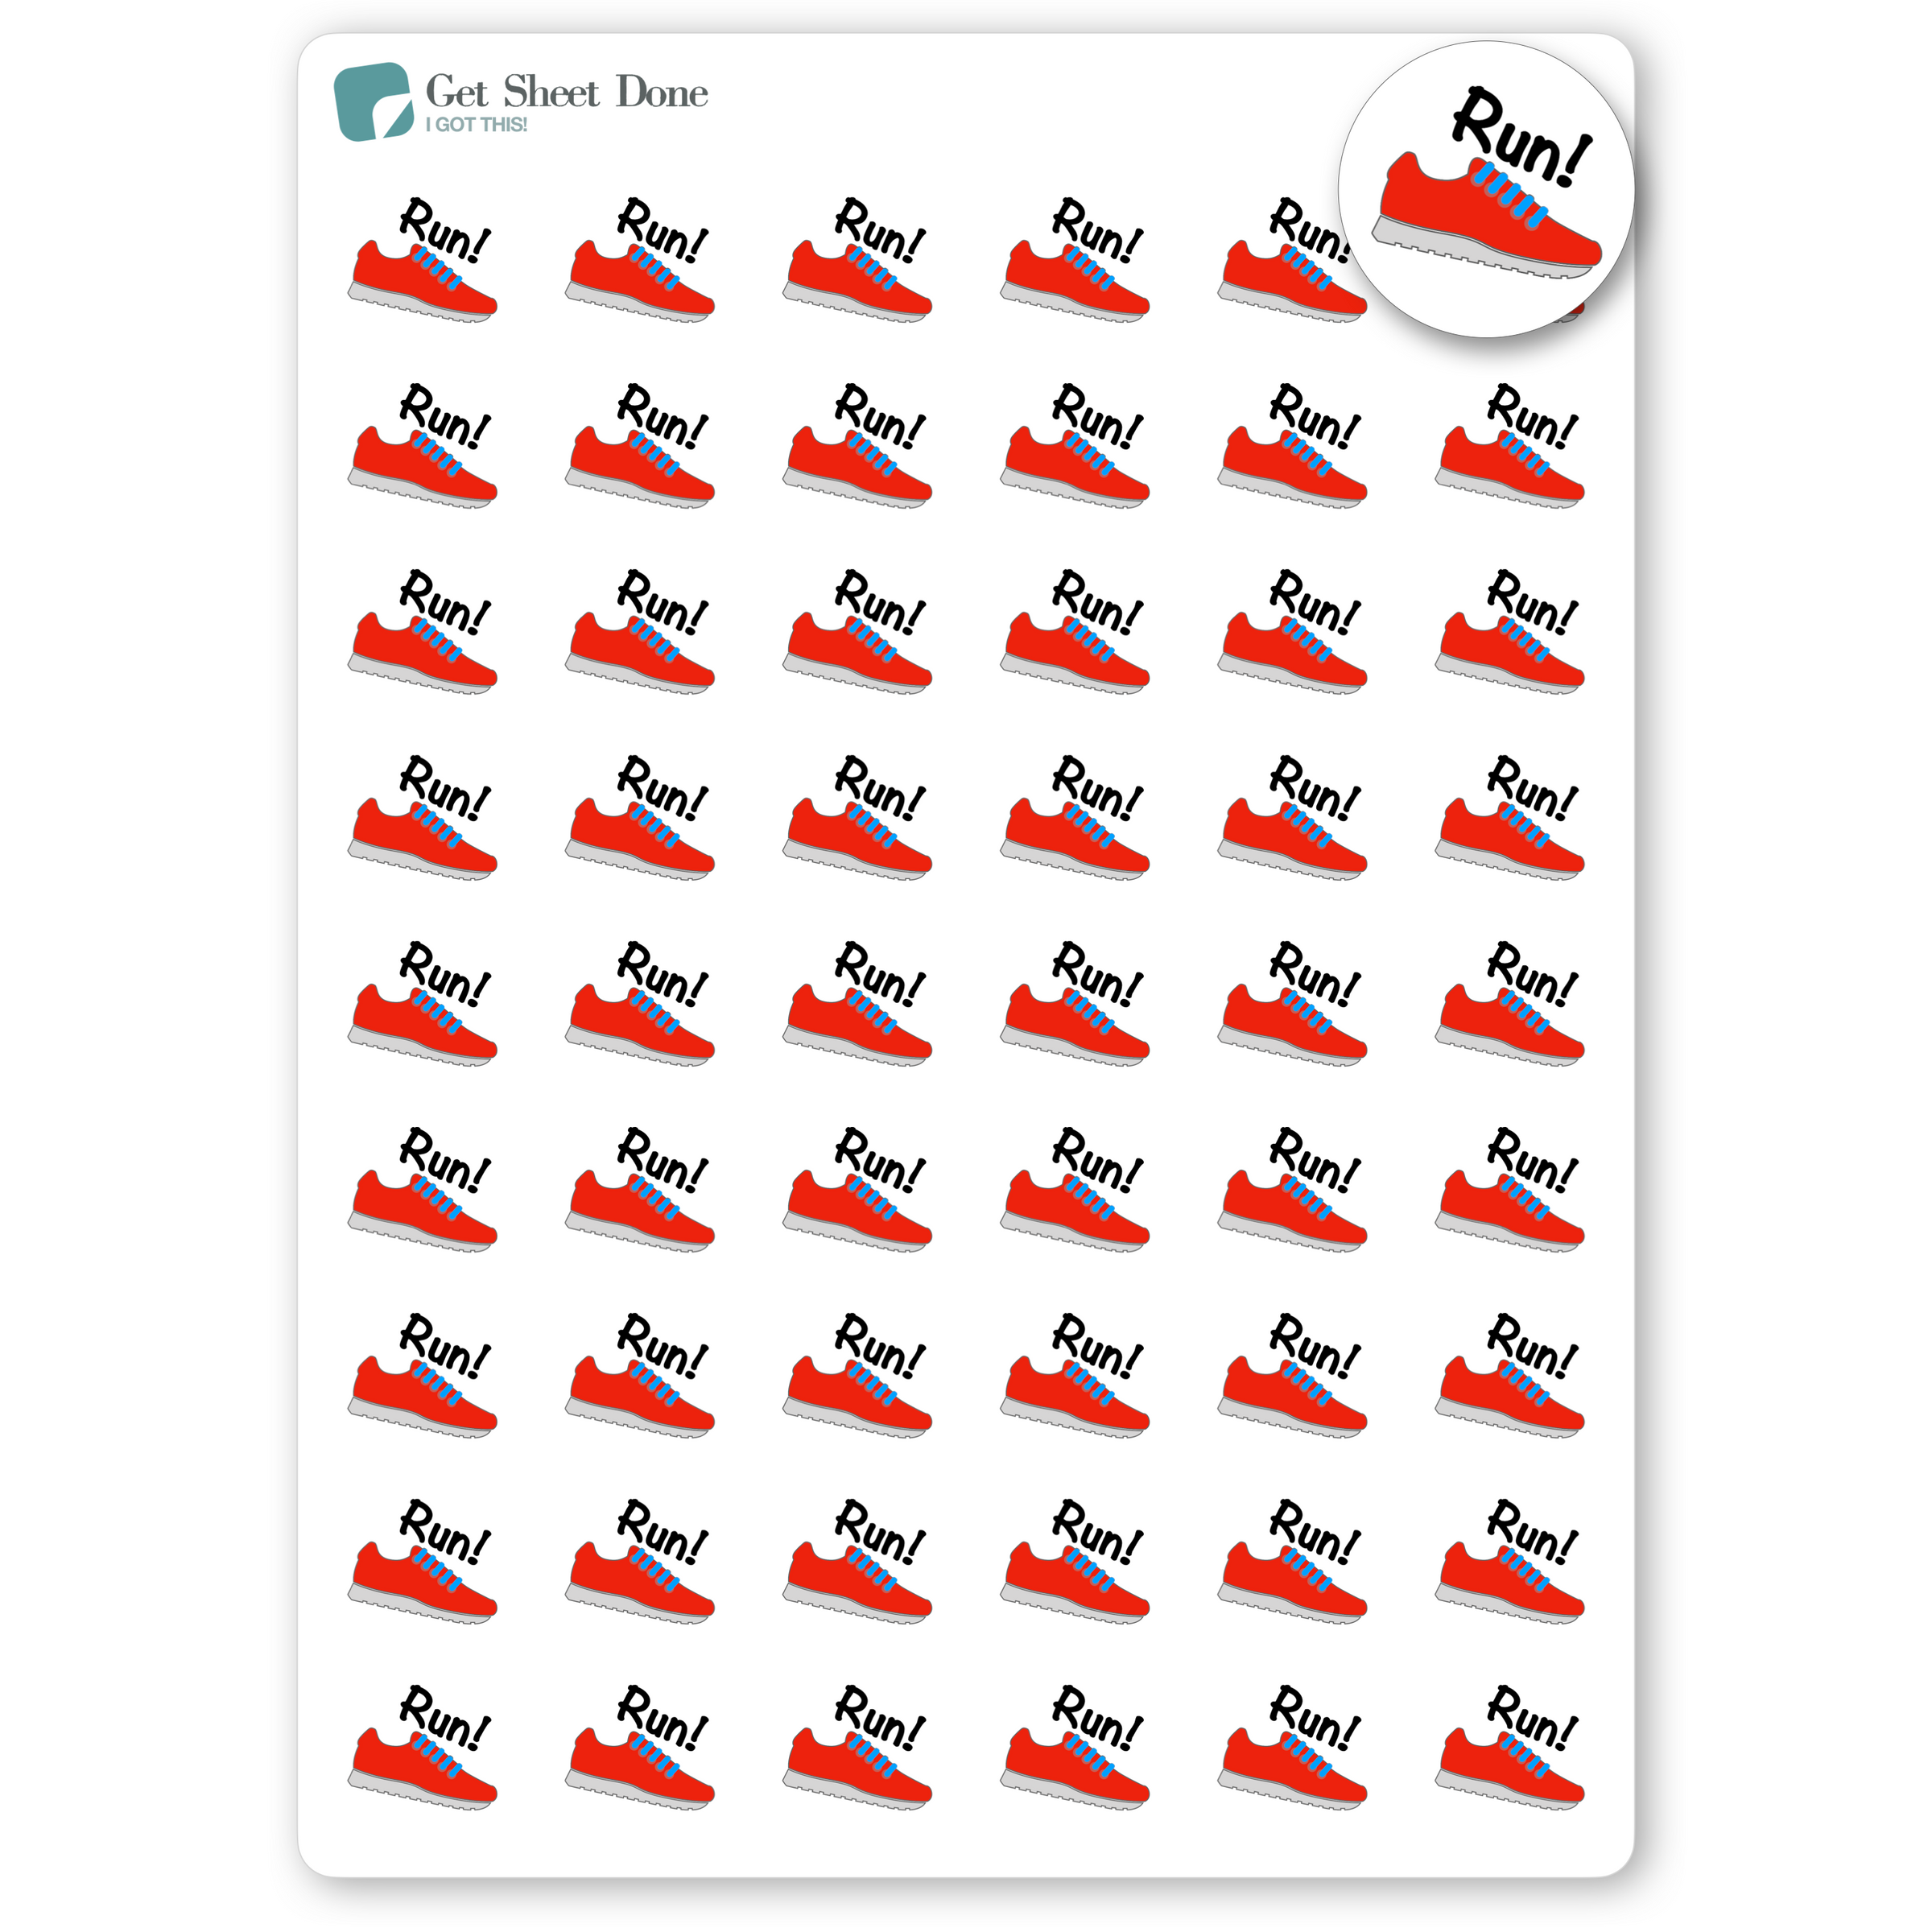 Walk Exercise Planner Stickers